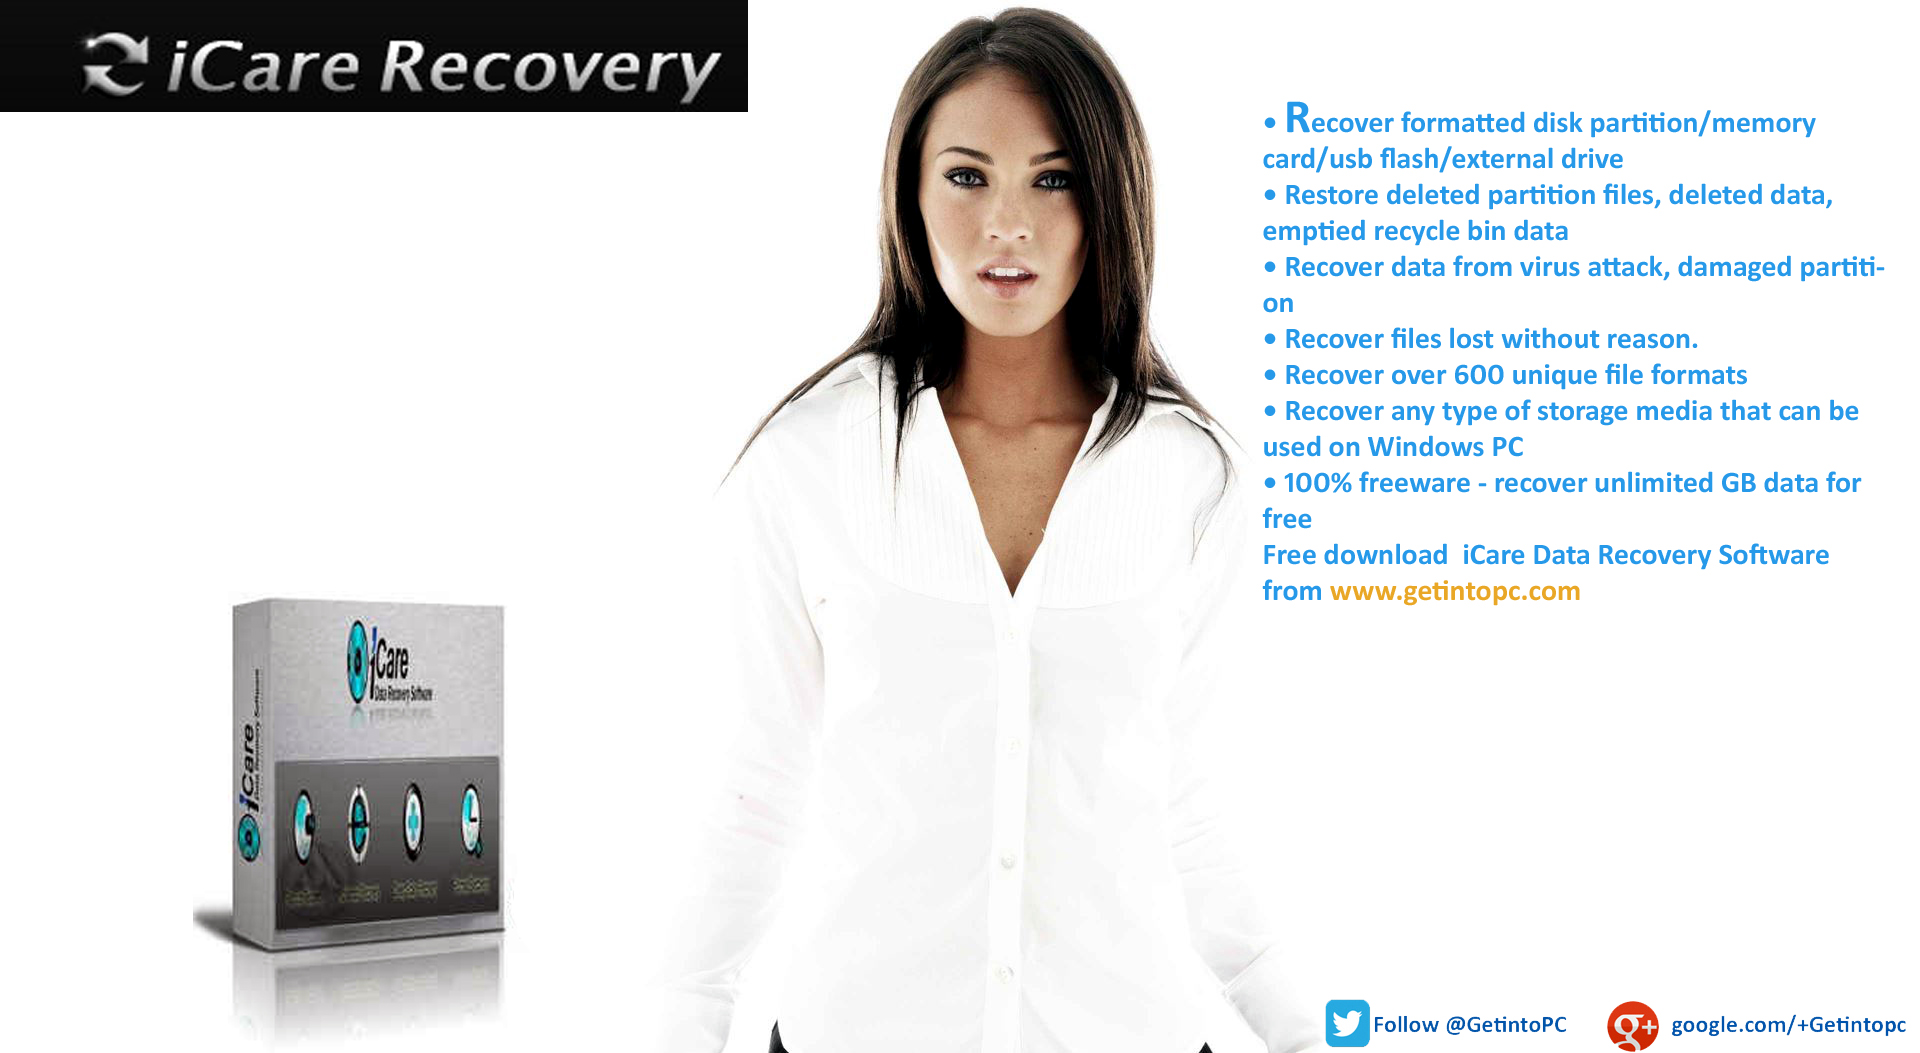 iCare Data Recovery Software Free Download